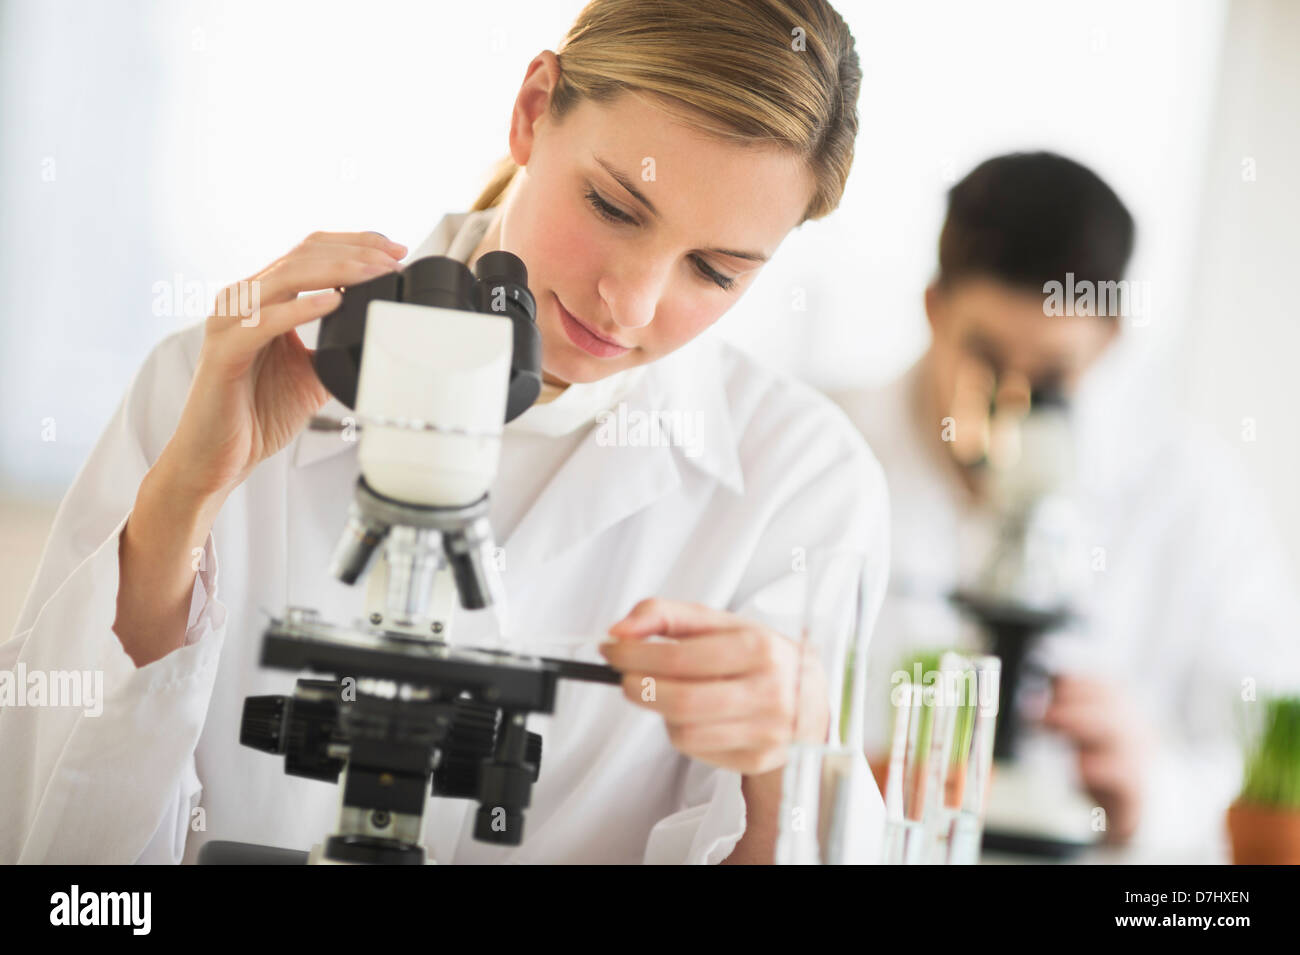 Scientists doing research on microscopes Stock Photo